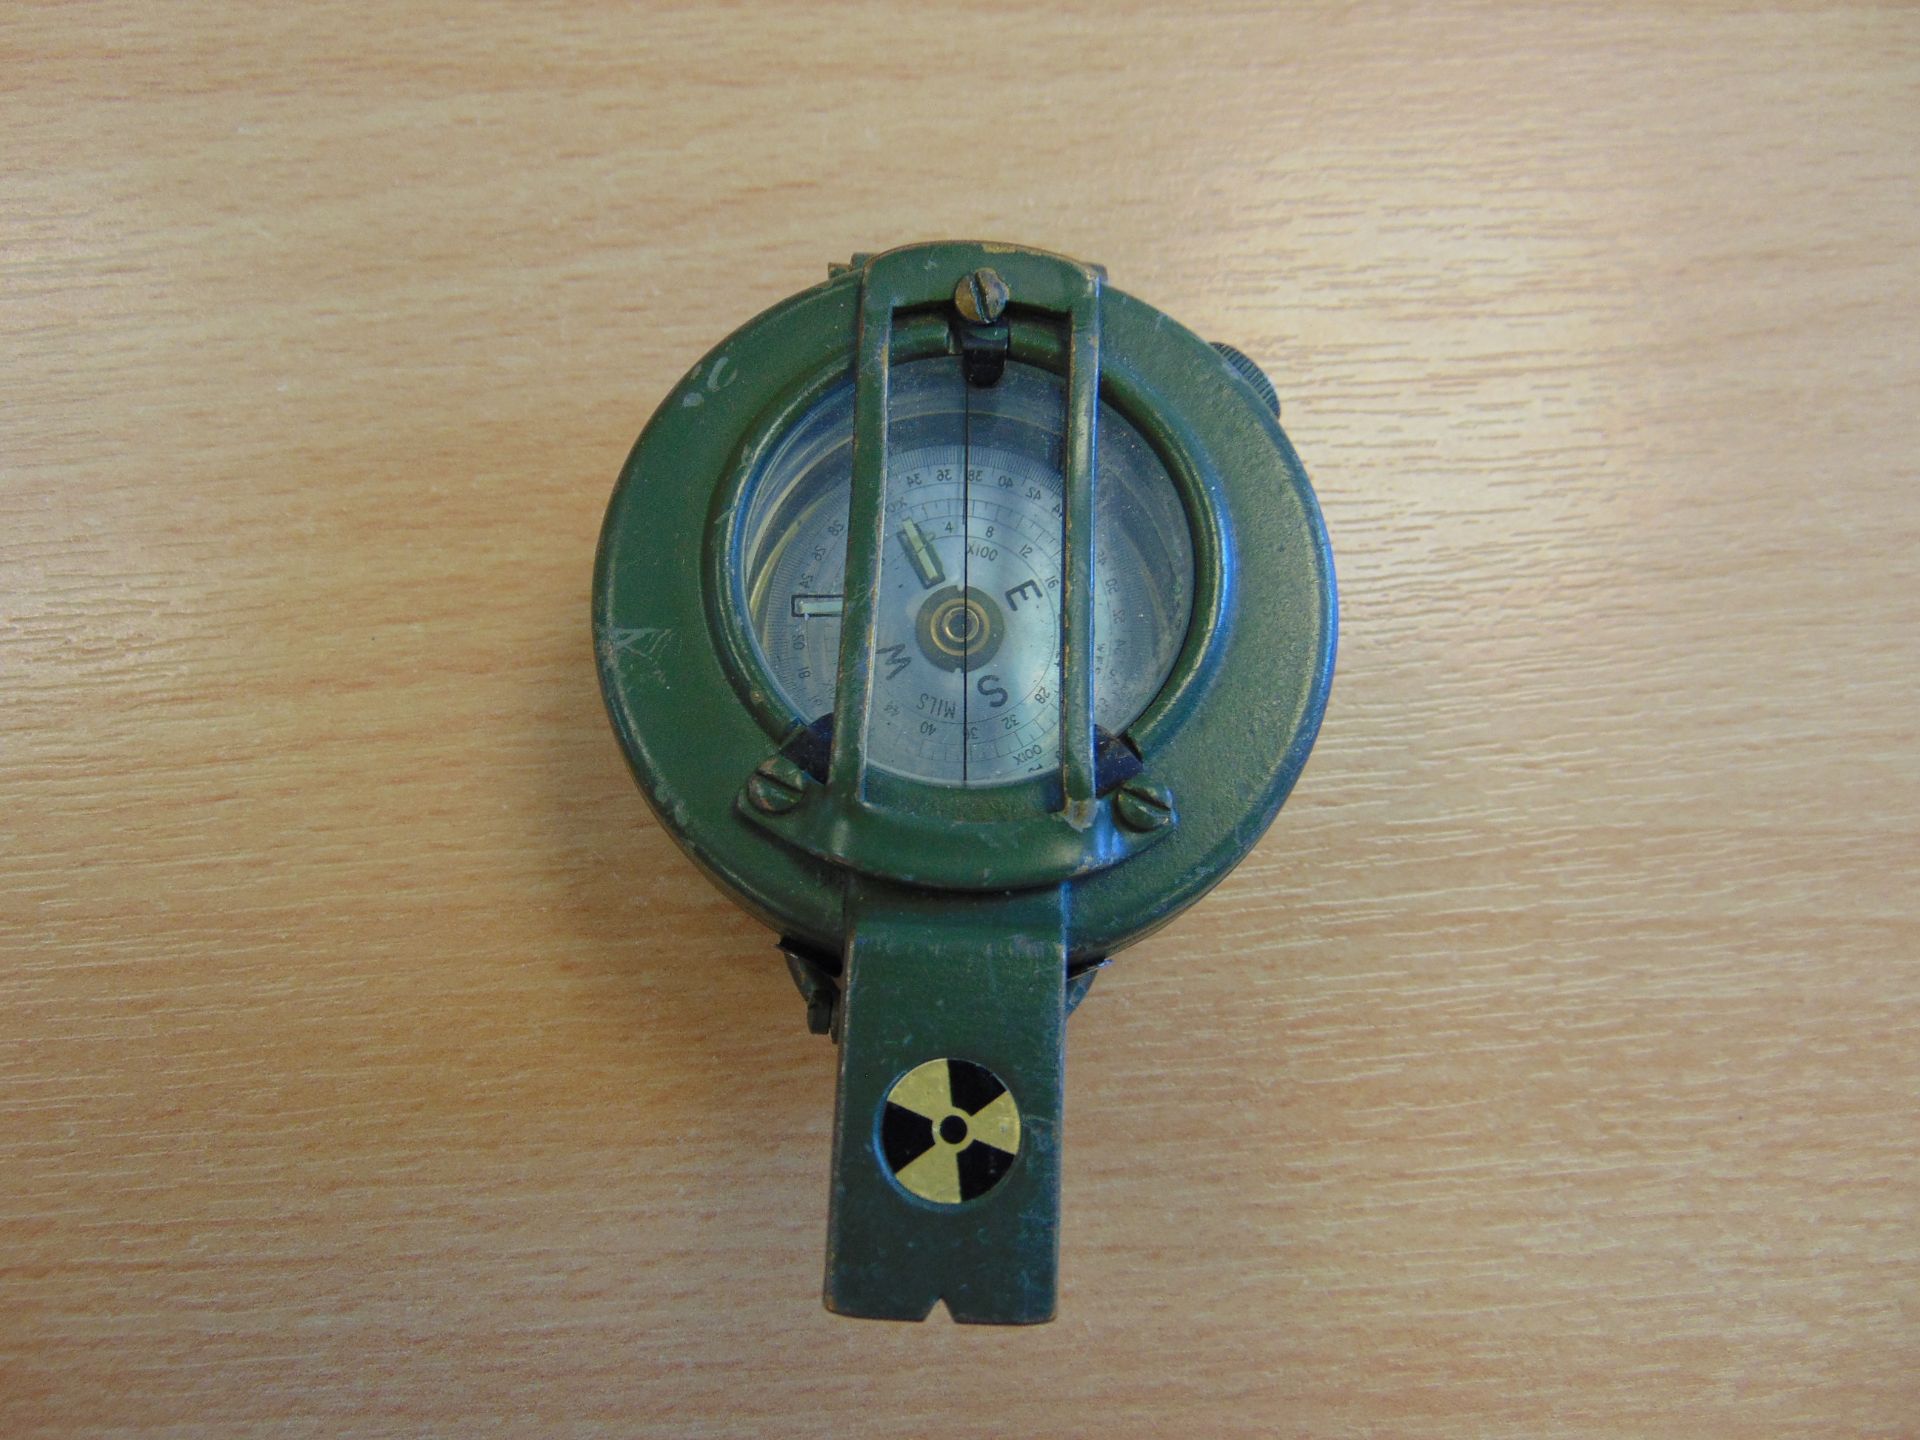 Stanley London British Army Brass Prismatic Compass in Mils, Nato Marks - Image 2 of 3